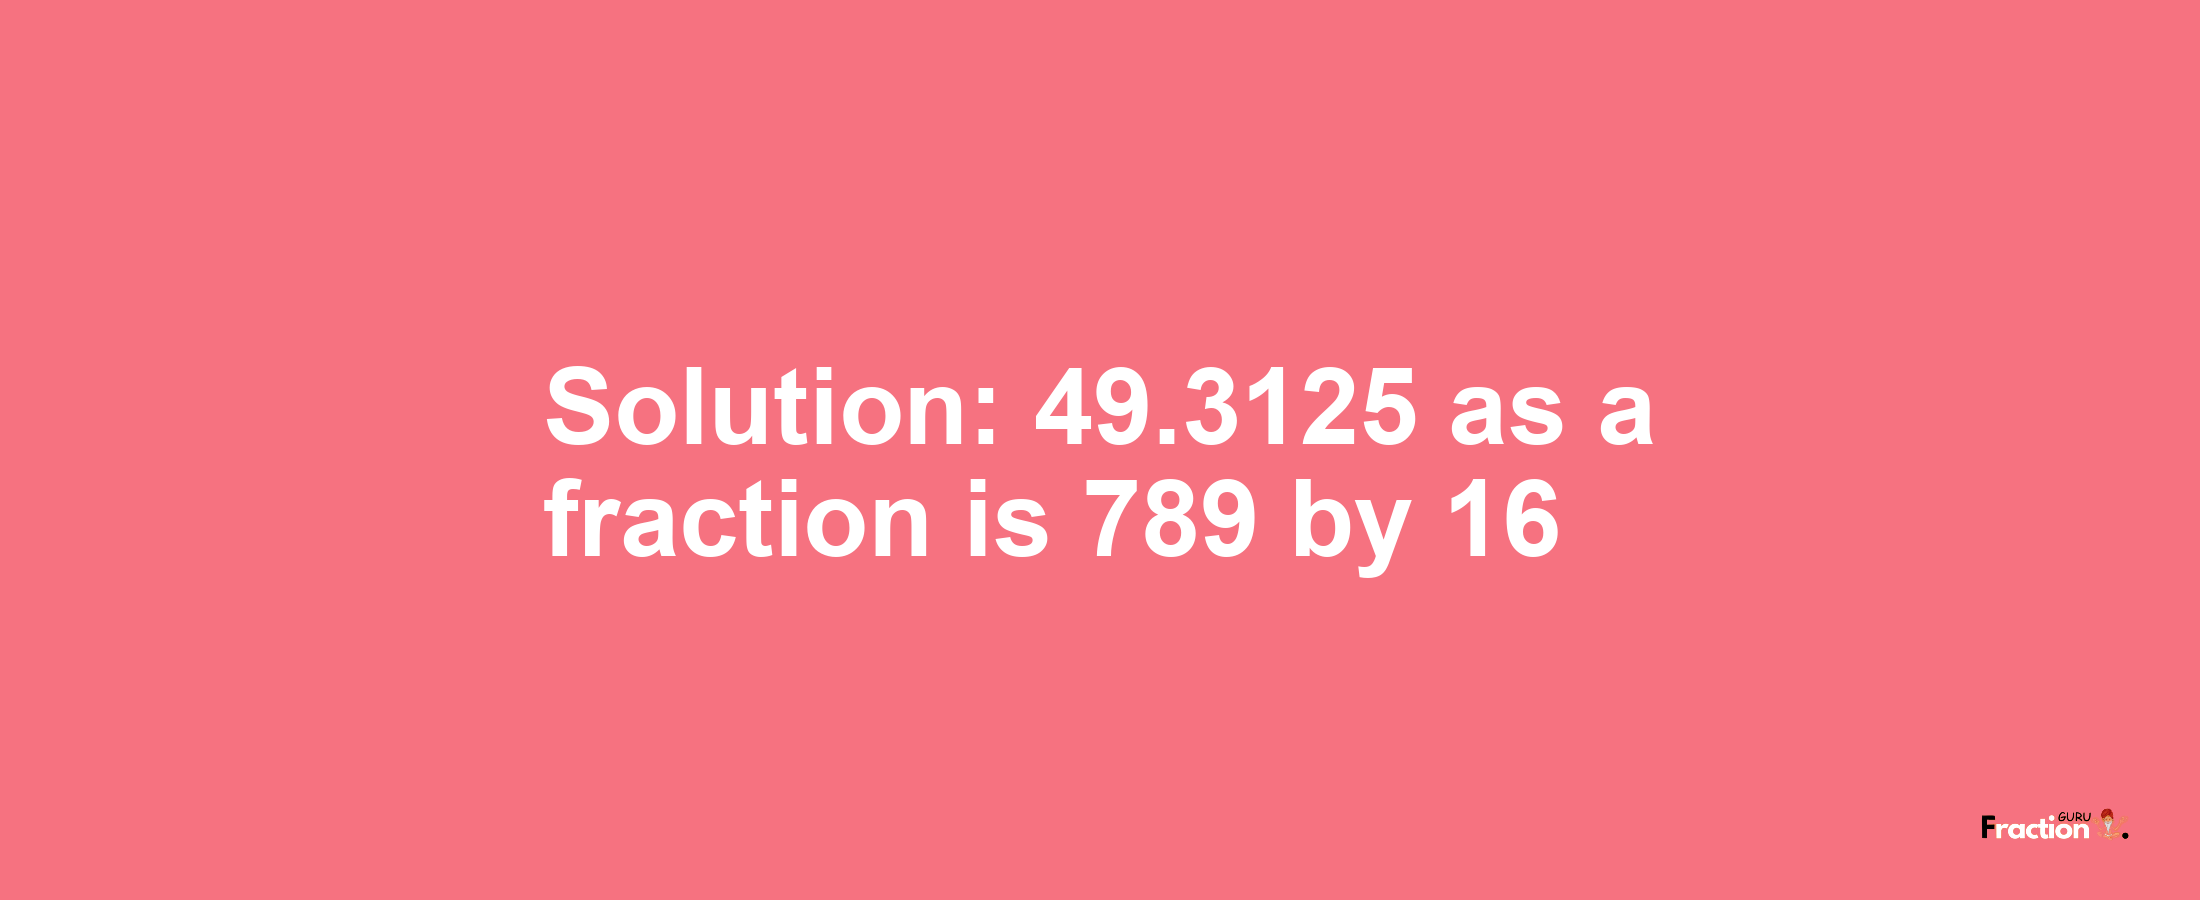 Solution:49.3125 as a fraction is 789/16